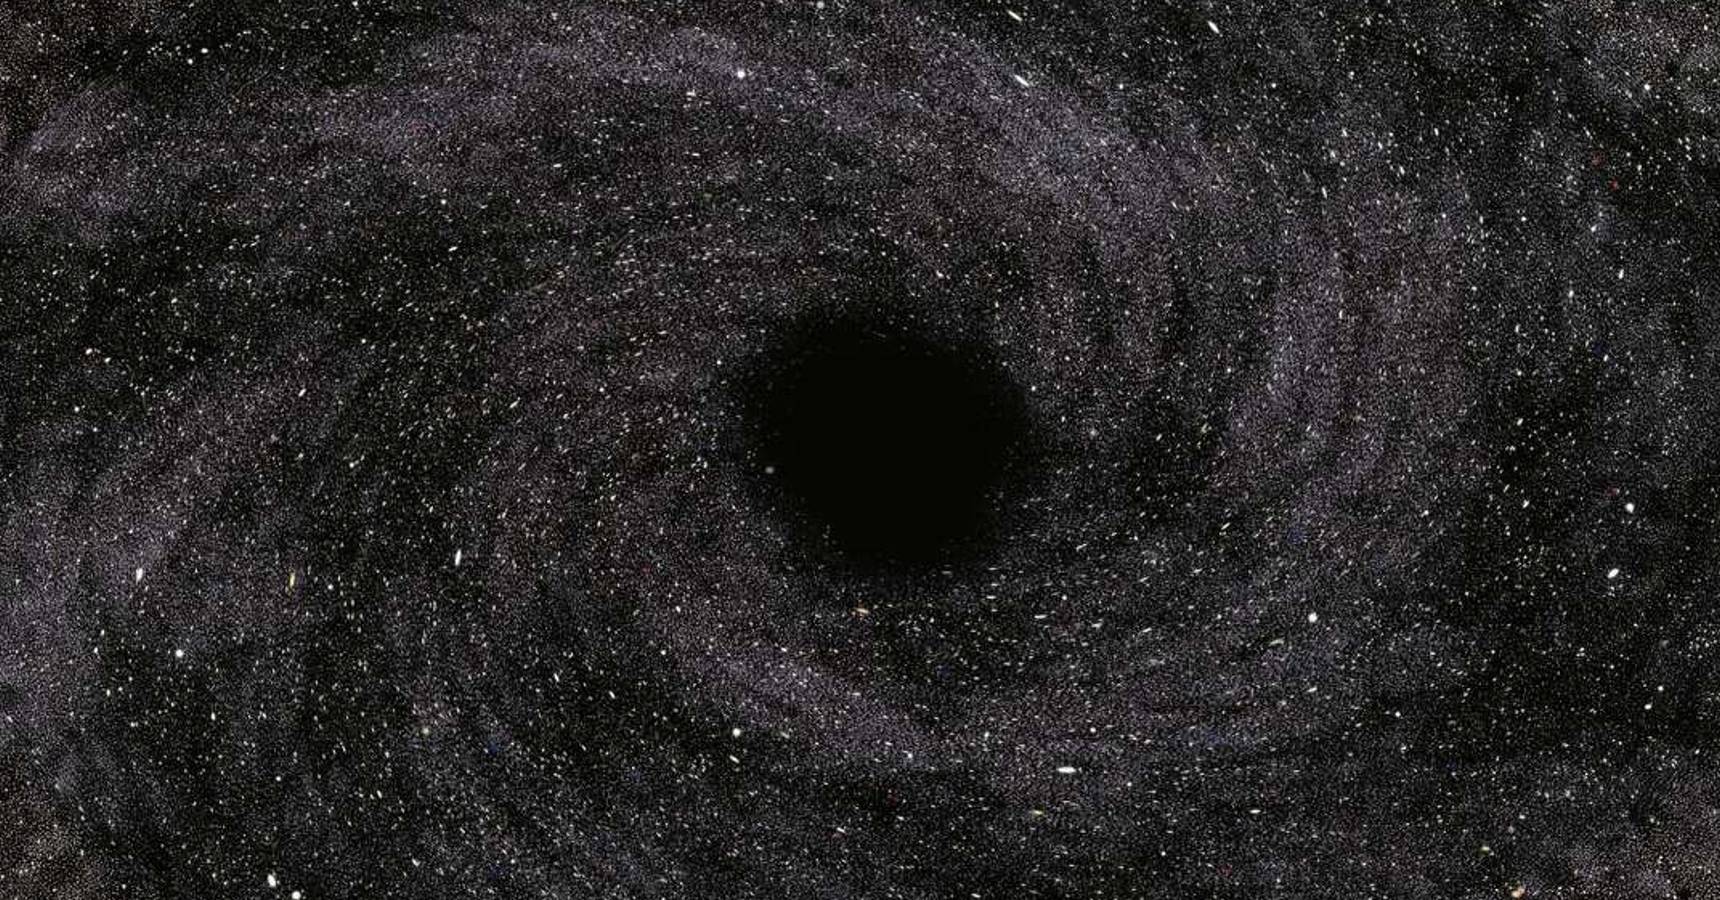 NASA found a hole in space